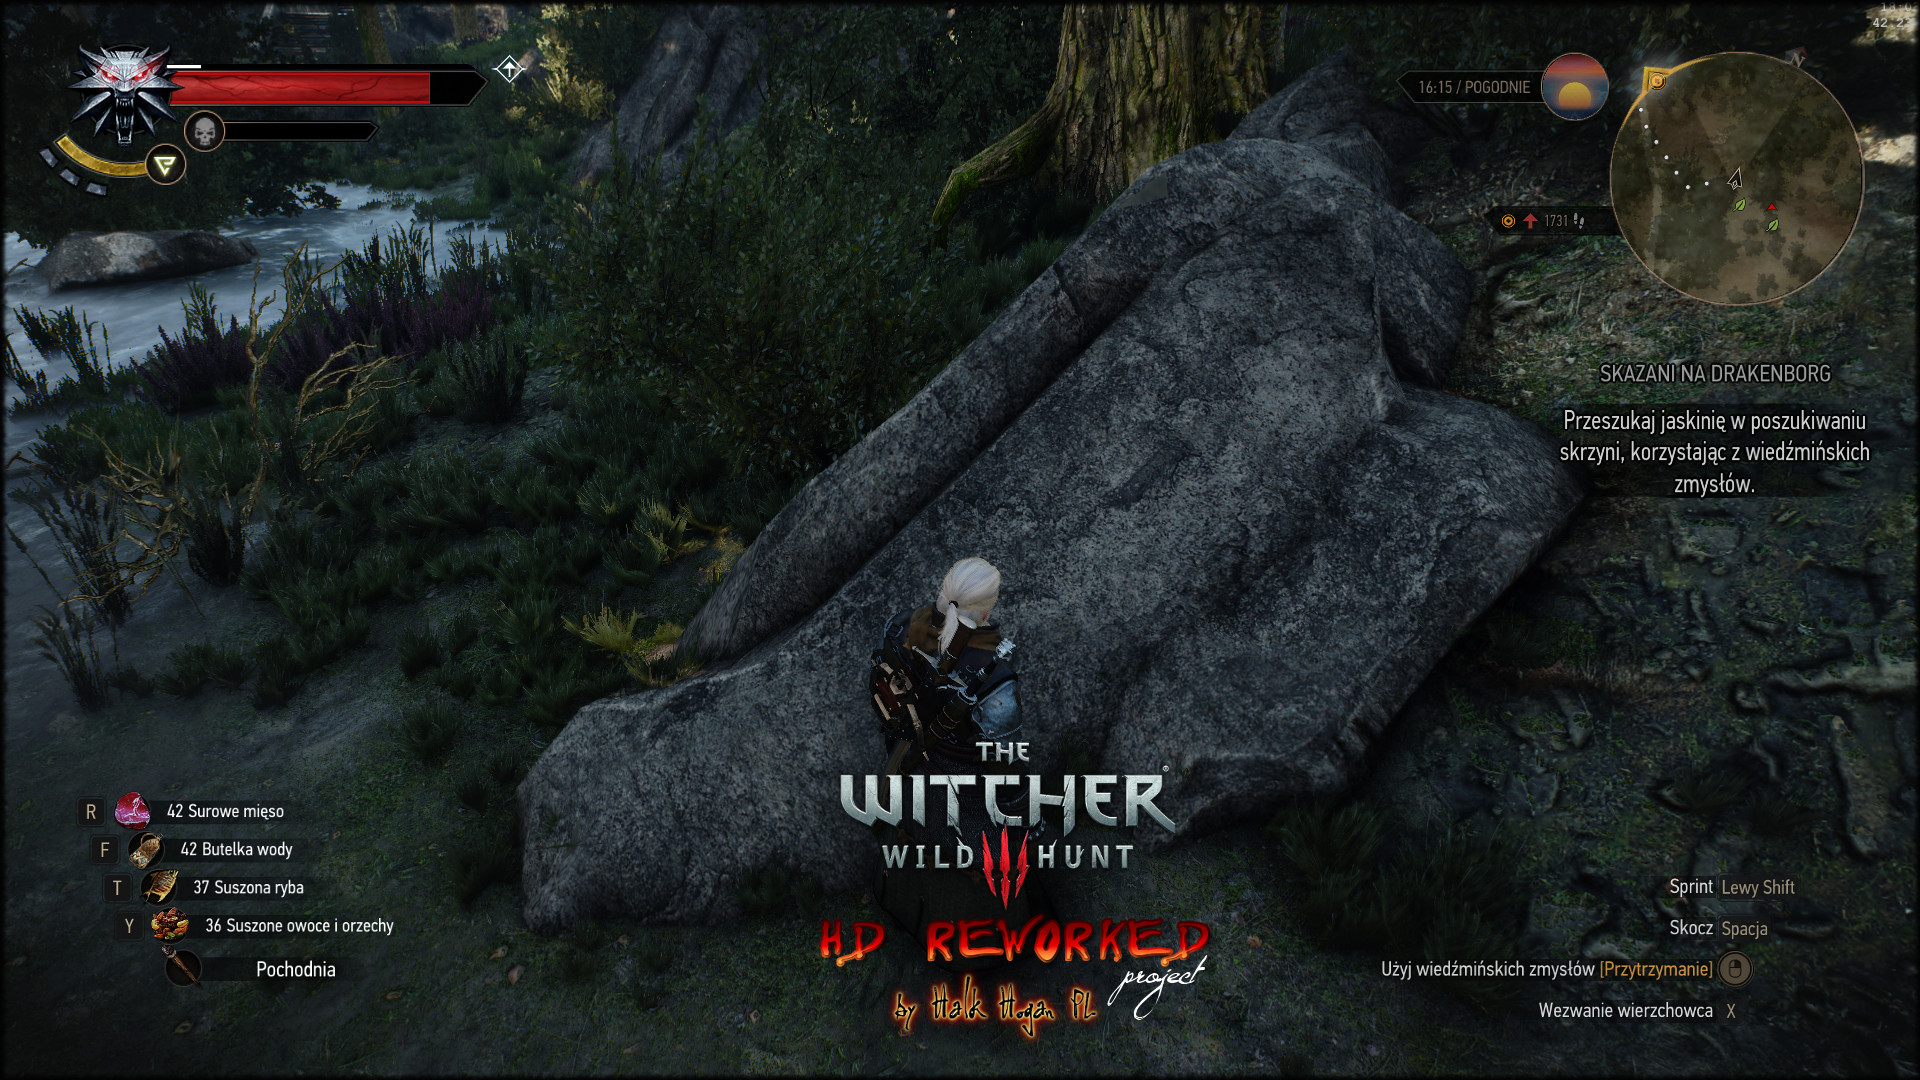 The Witcher 3: Wild Hunt High Res Texture mod and Draw distance mod released